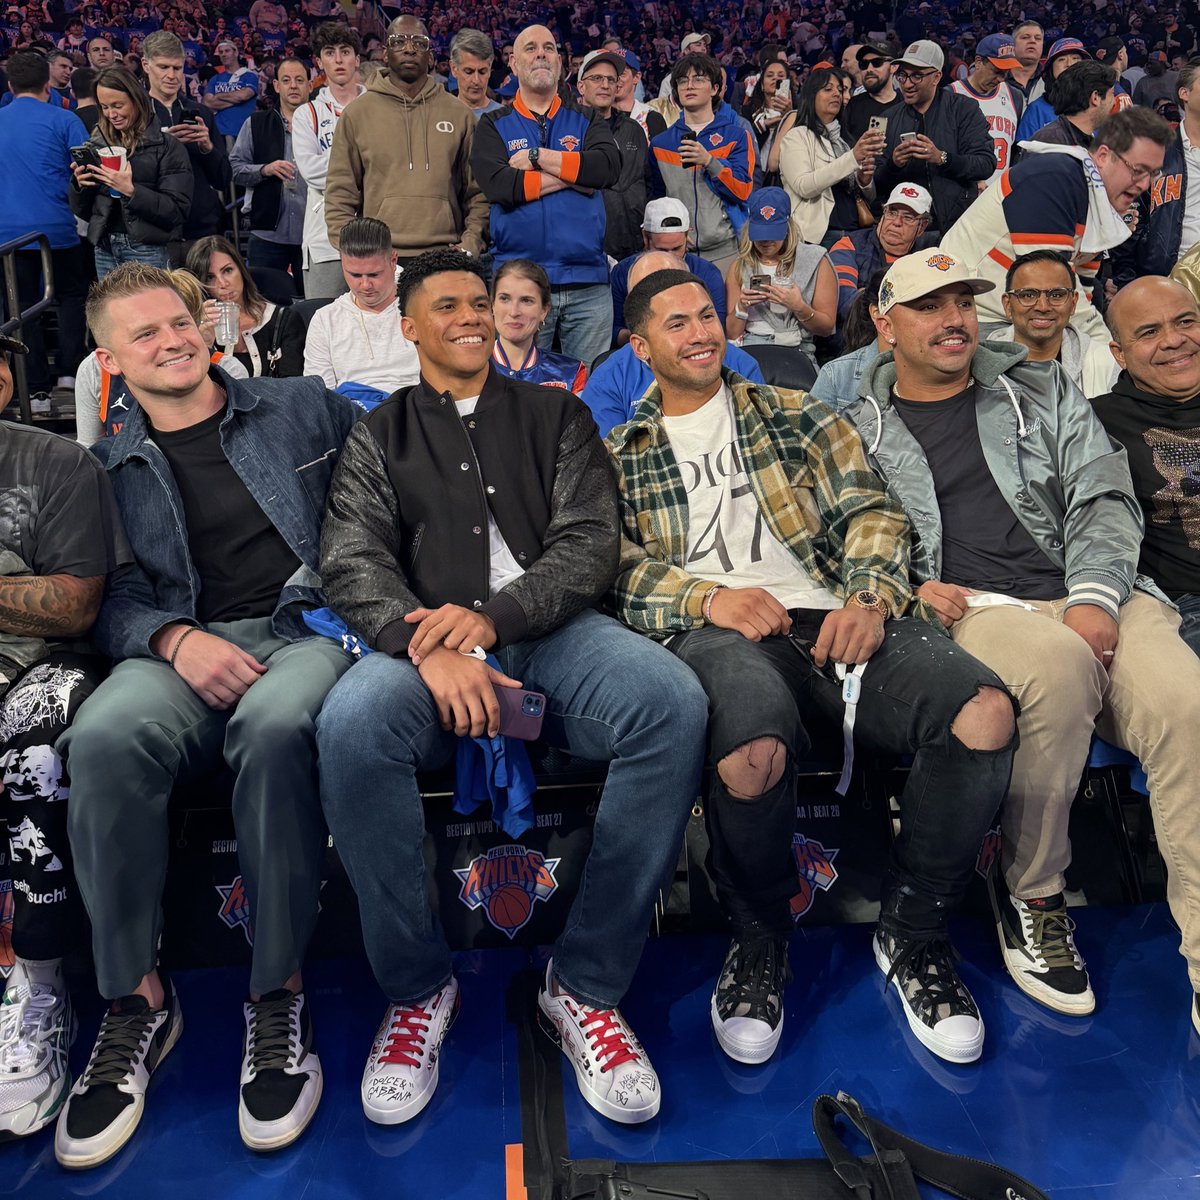 The Yankees are in the house for Game 1 of Knicks-Sixers at MSG! (via @KnicksMSGN)